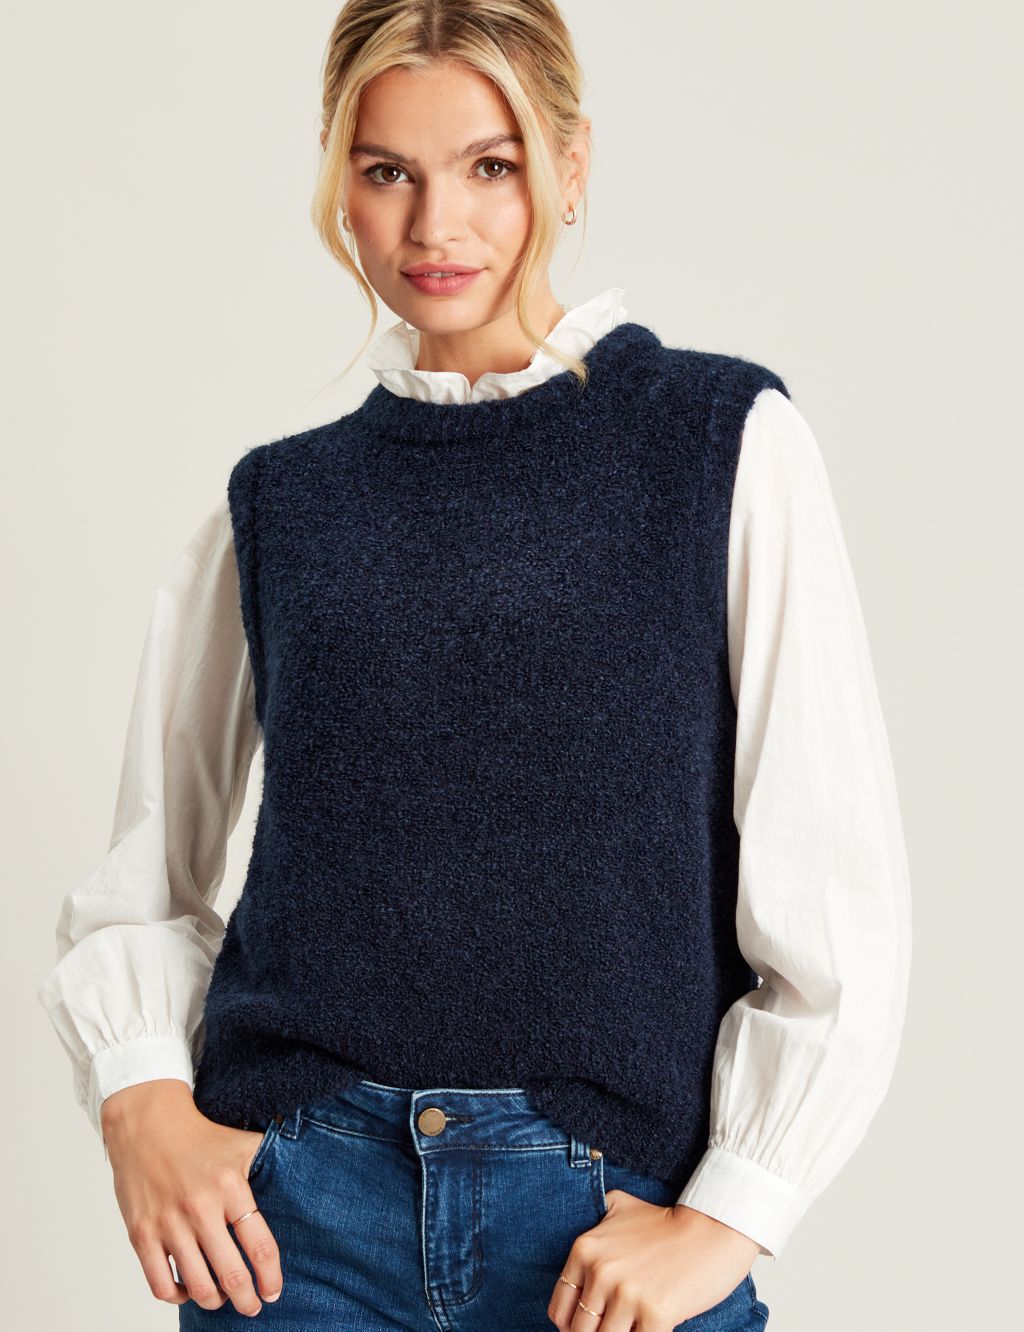 Textured Crew Neck Knitted Vest image 1